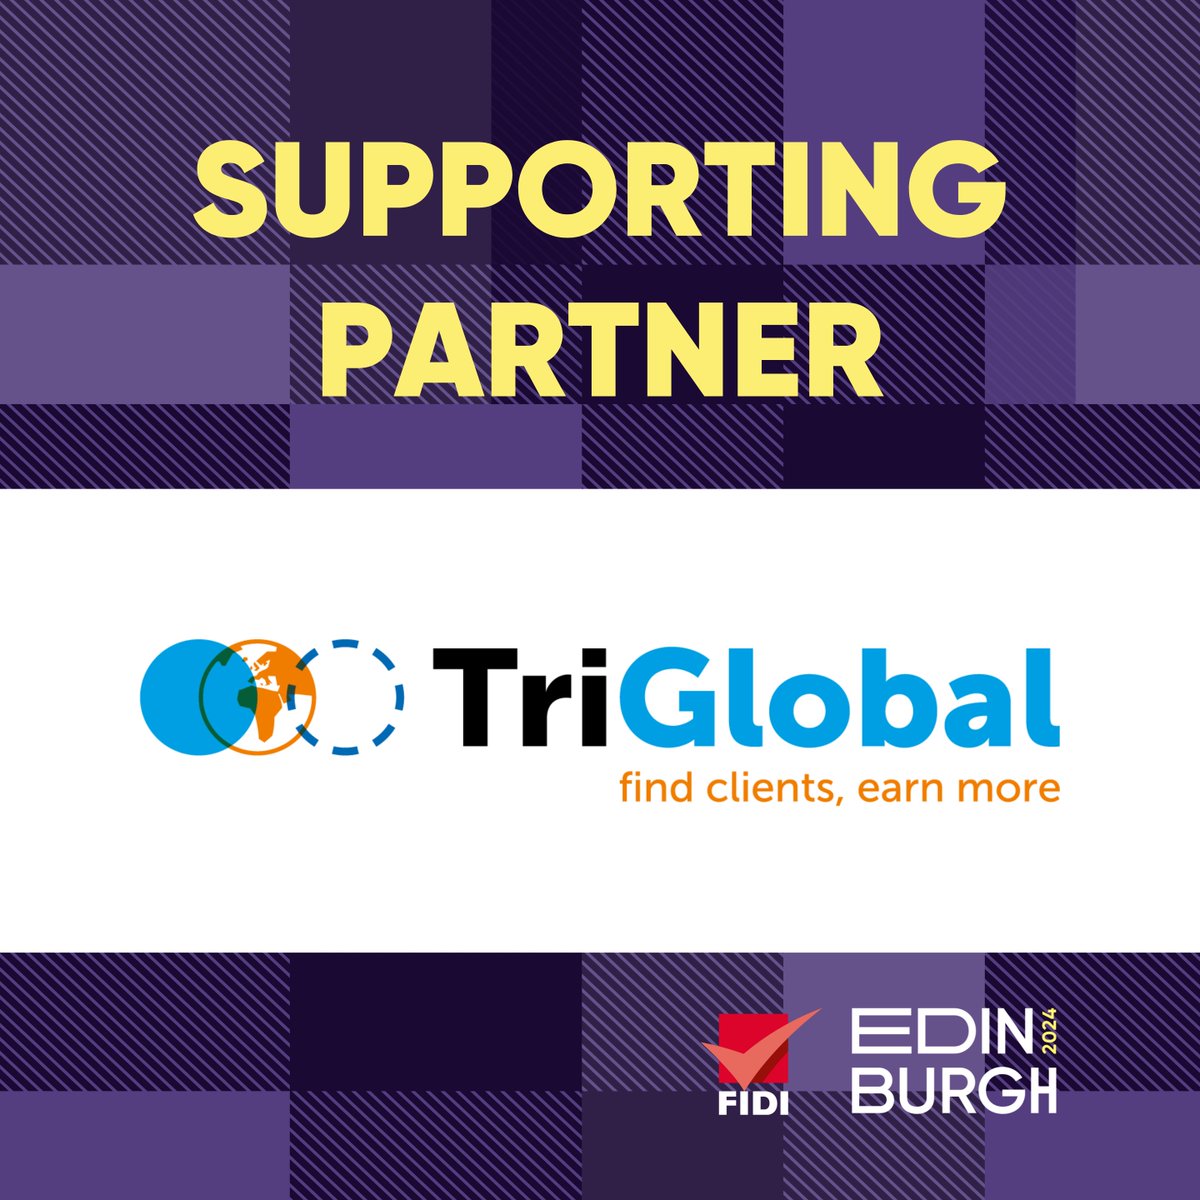 🌍 #2024FIDIconference: Thank you, TriGlobal, partner of the 2024 FIDI Conference in Edinburgh! Get the app to connect with attendees, book meetings & view your agenda : 🔶Google Play Store📷 lnkd.in/e86wv6Jv 🔶Apple App Store📷lnkd.in/e7XJ6xun